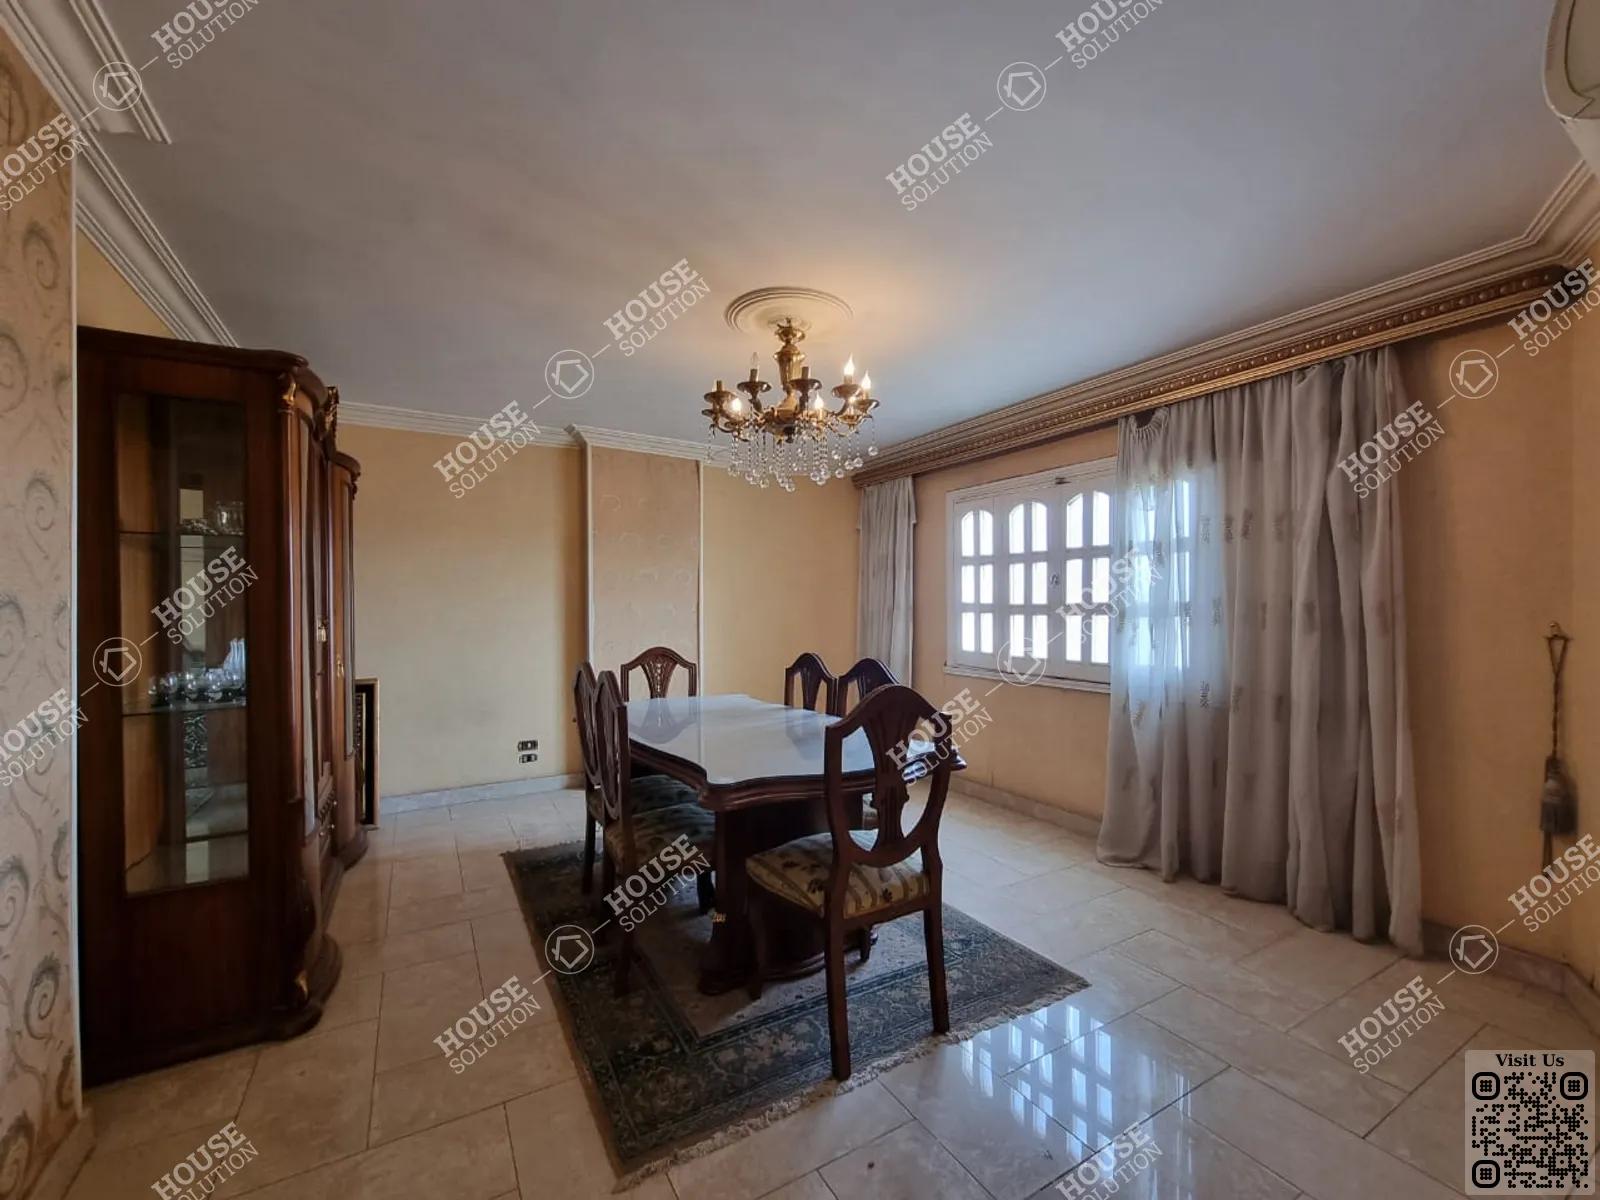 DINING AREA @ Apartments For Rent In Maadi Maadi Sarayat Area: 180 m² consists of 3 Bedrooms 2 Bathrooms Furnished 5 stars #5373-2